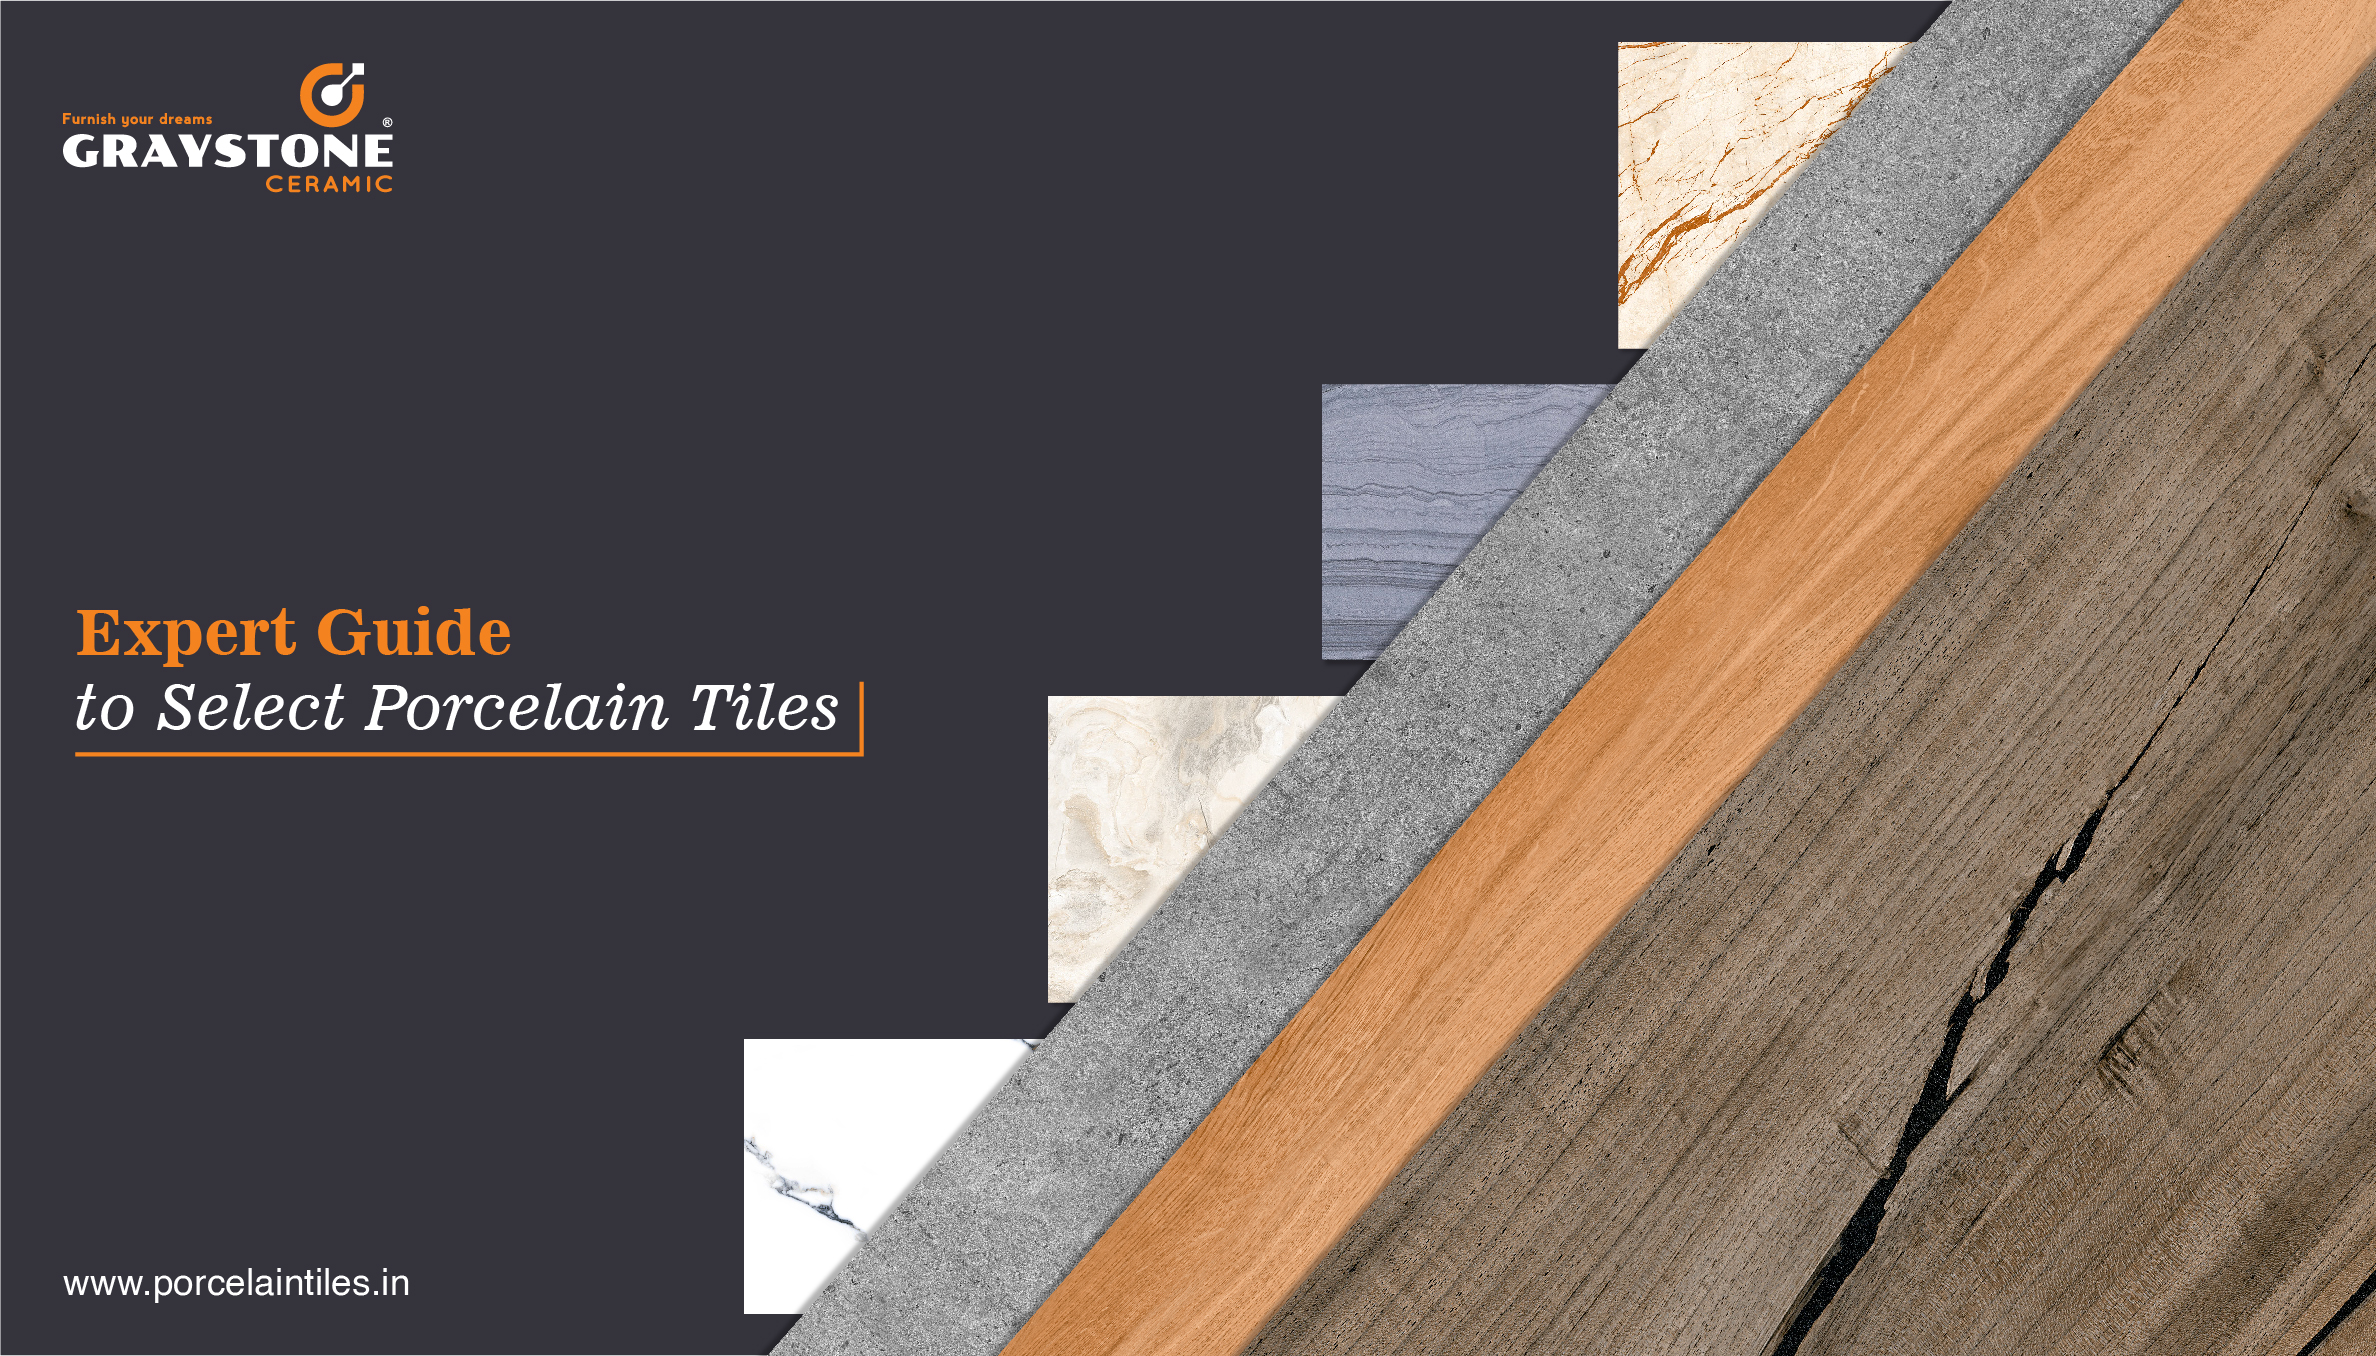 Expert Guide to select Porcelain tiles